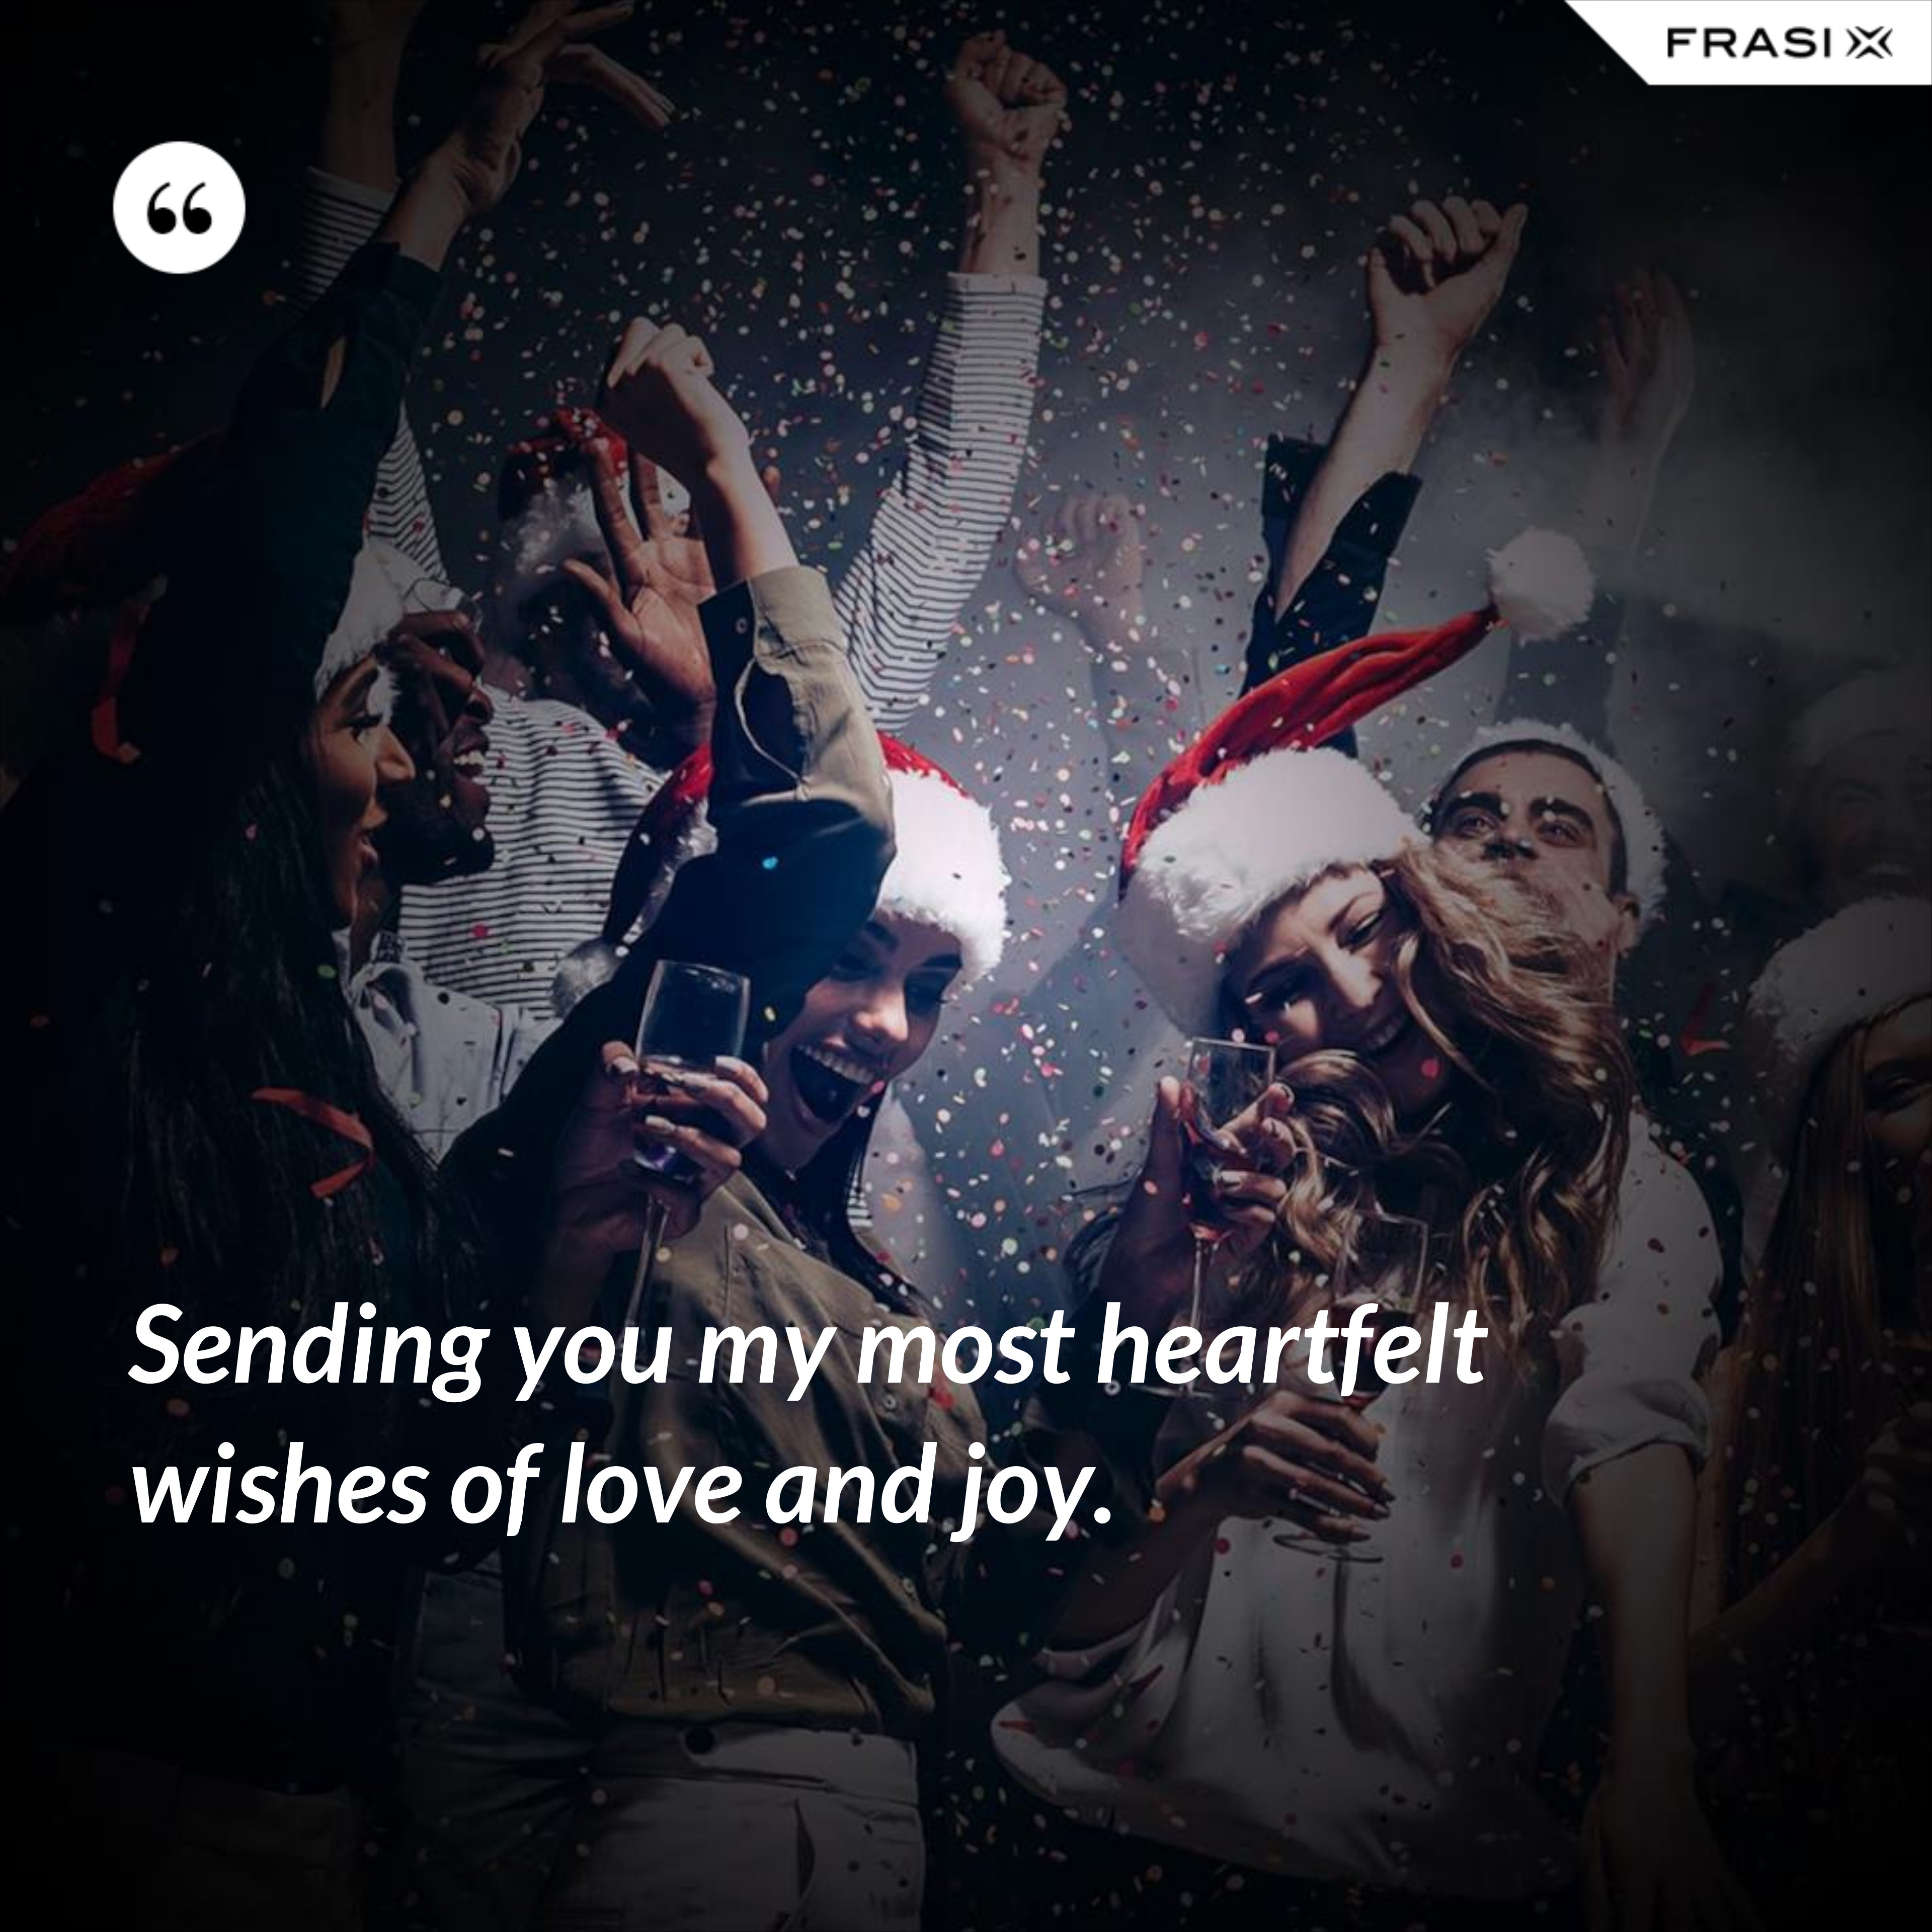 Sending you my most heartfelt wishes of love and joy. - Anonimo